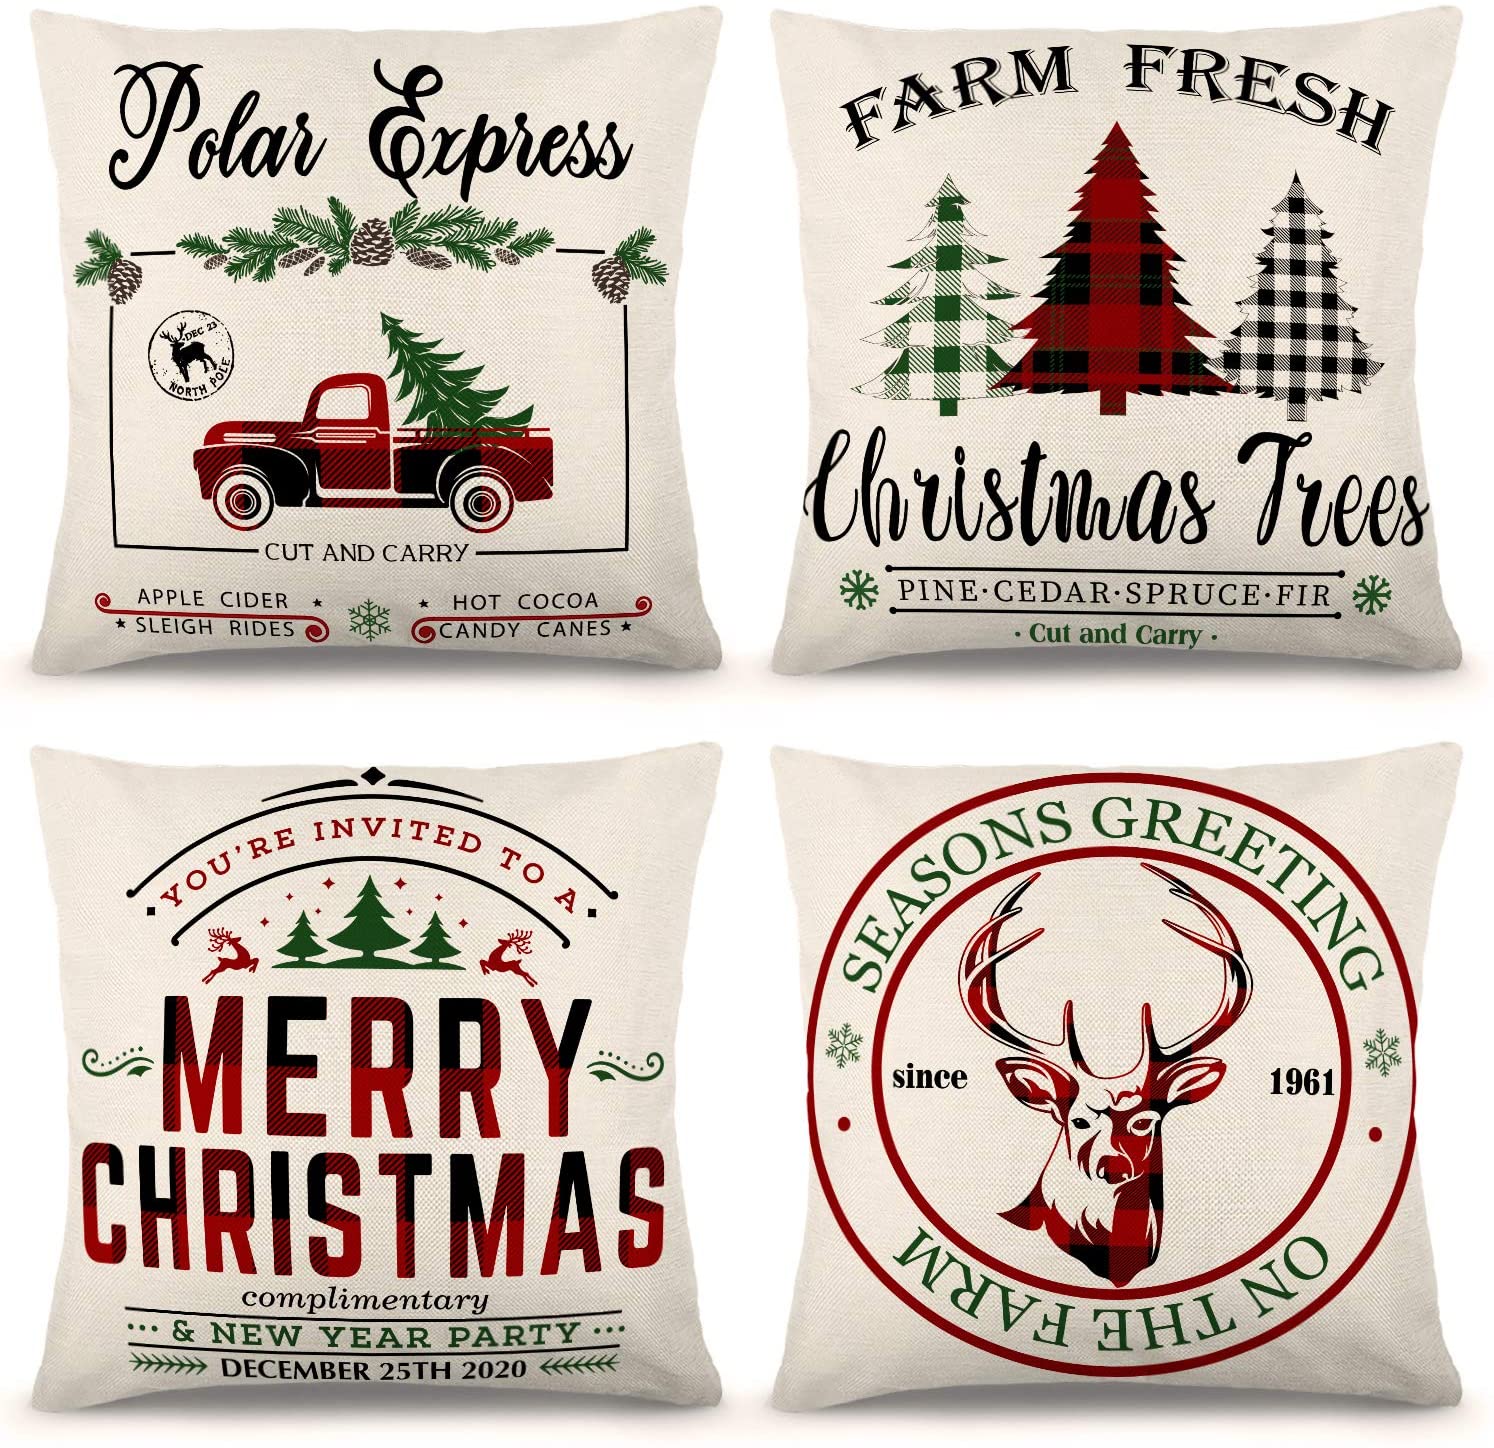 Decorx Christmas Pillow Covers 1818 inch Set of 4 Black and Red Buffalo Plaid Farmhouse Pillow Covers Holiday Rustic Linen Pillow Case for Sofa Couch